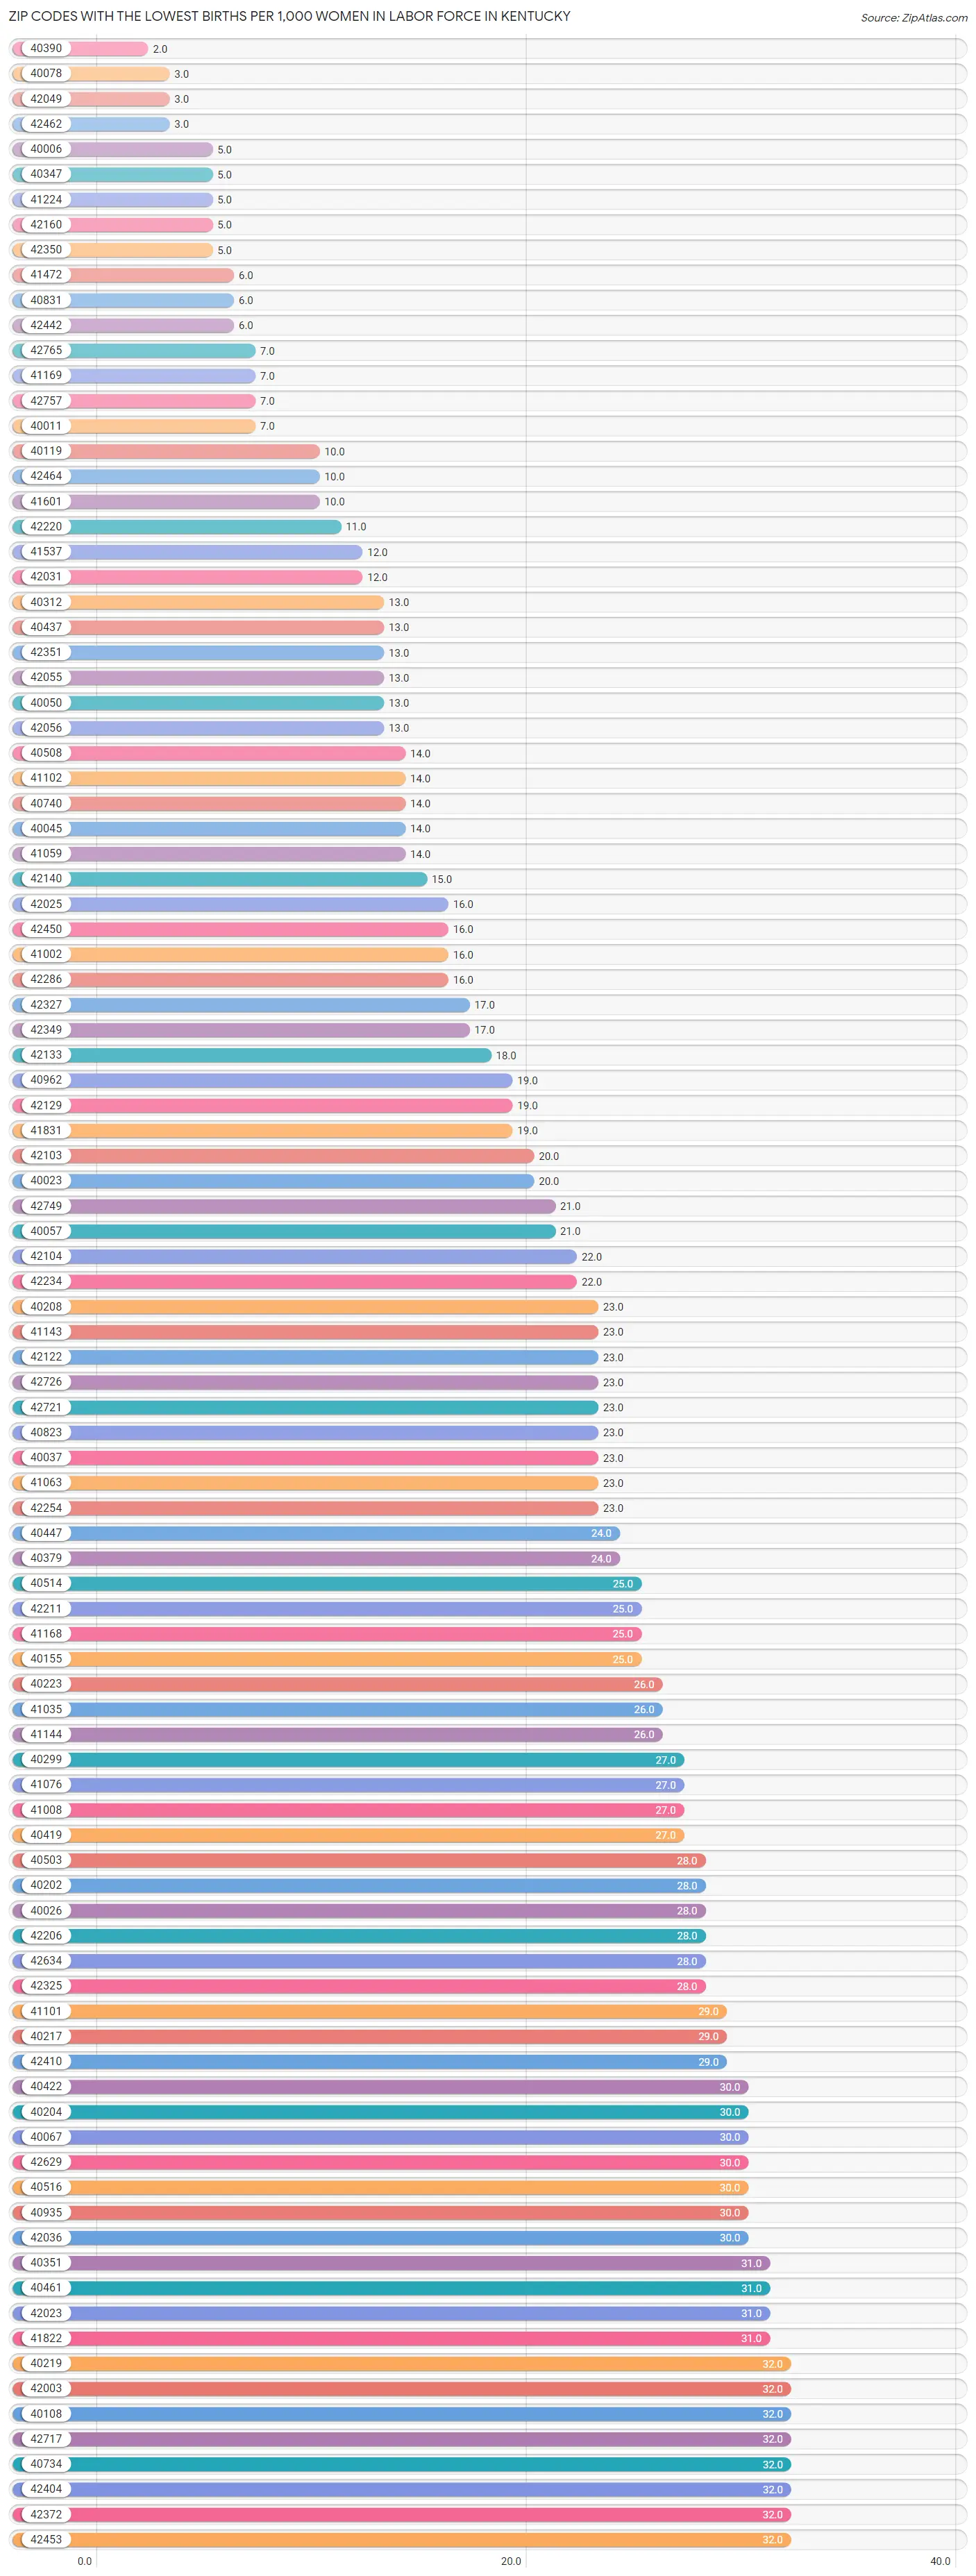 Zip Codes with the Lowest Births per 1,000 Women in Labor Force in Kentucky Chart